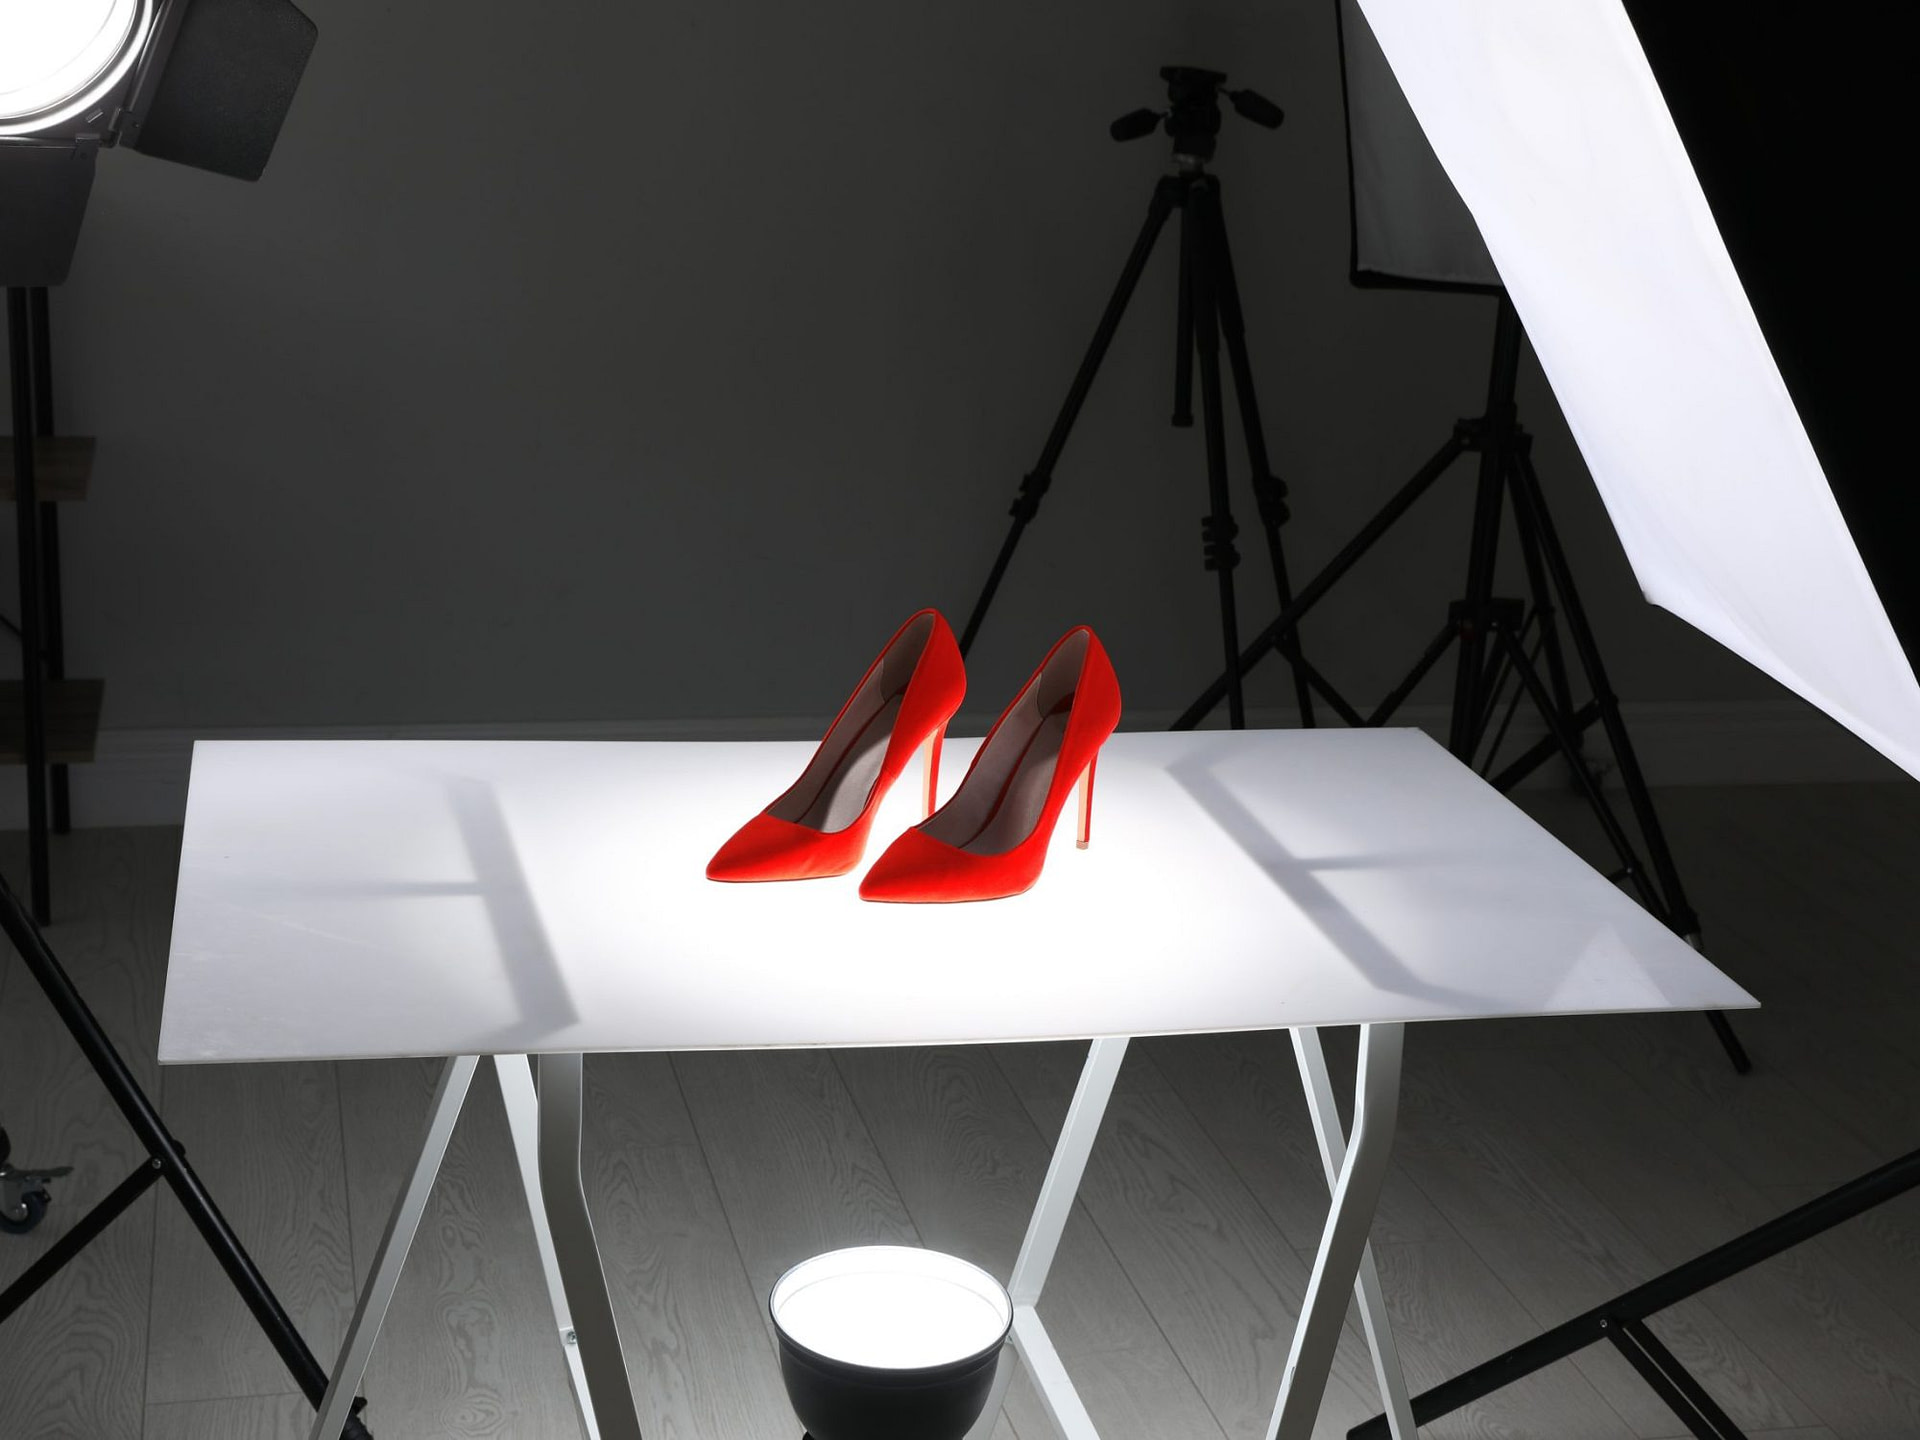 Professional photography equipment prepared for shooting stylish shoes in studio